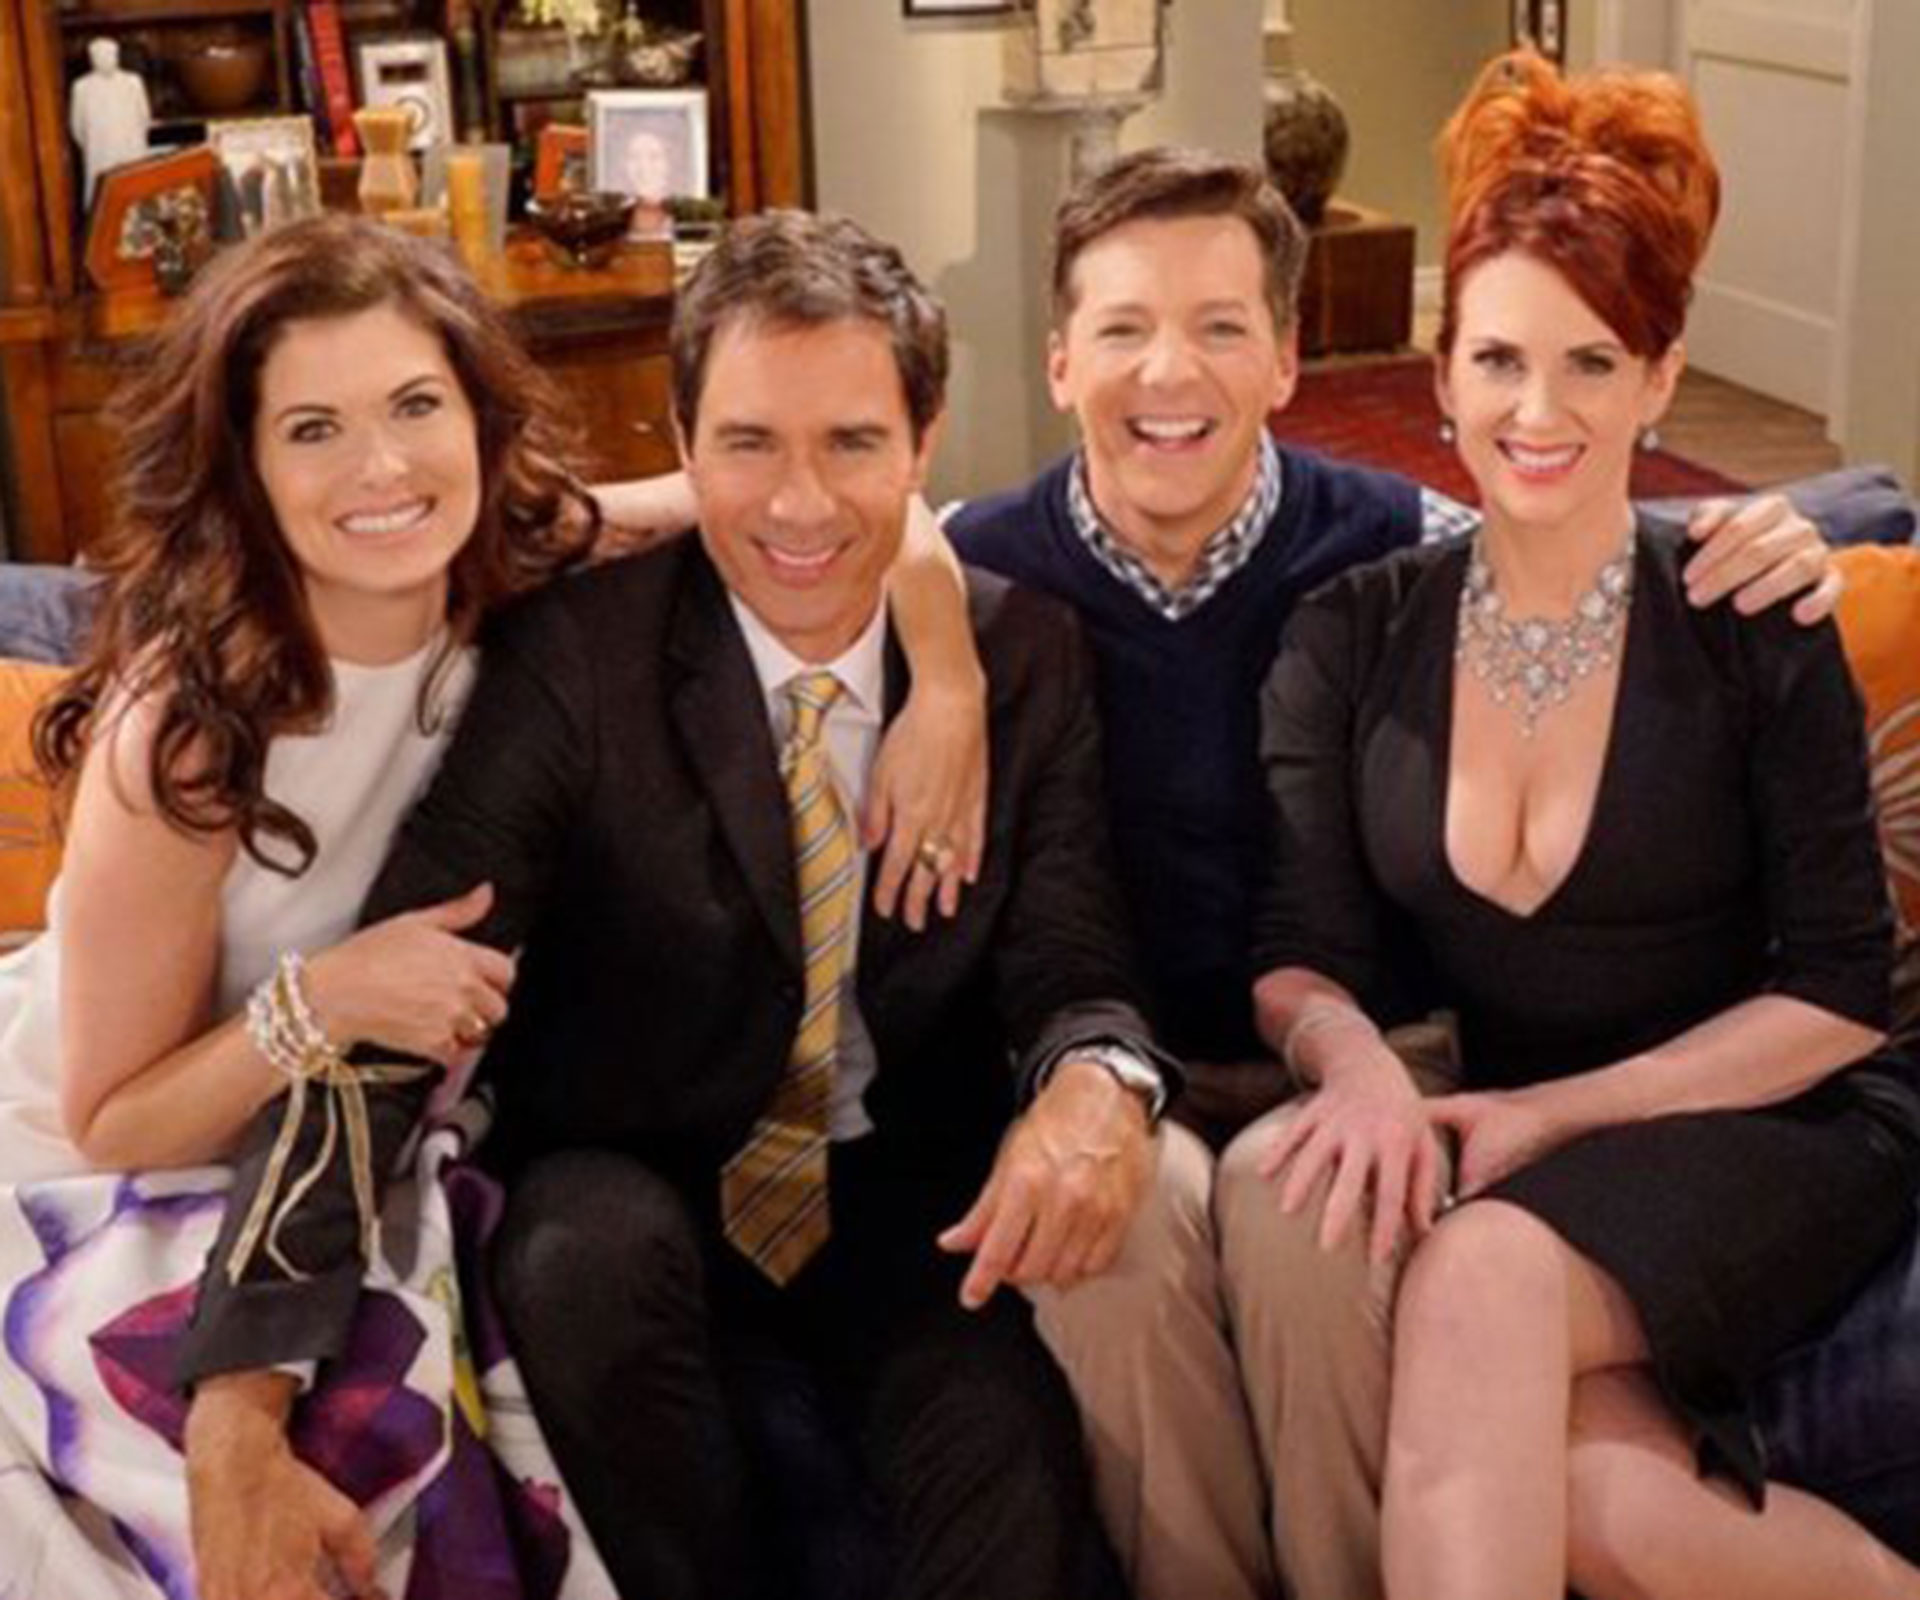 Could Will & Grace be returning to our screens?